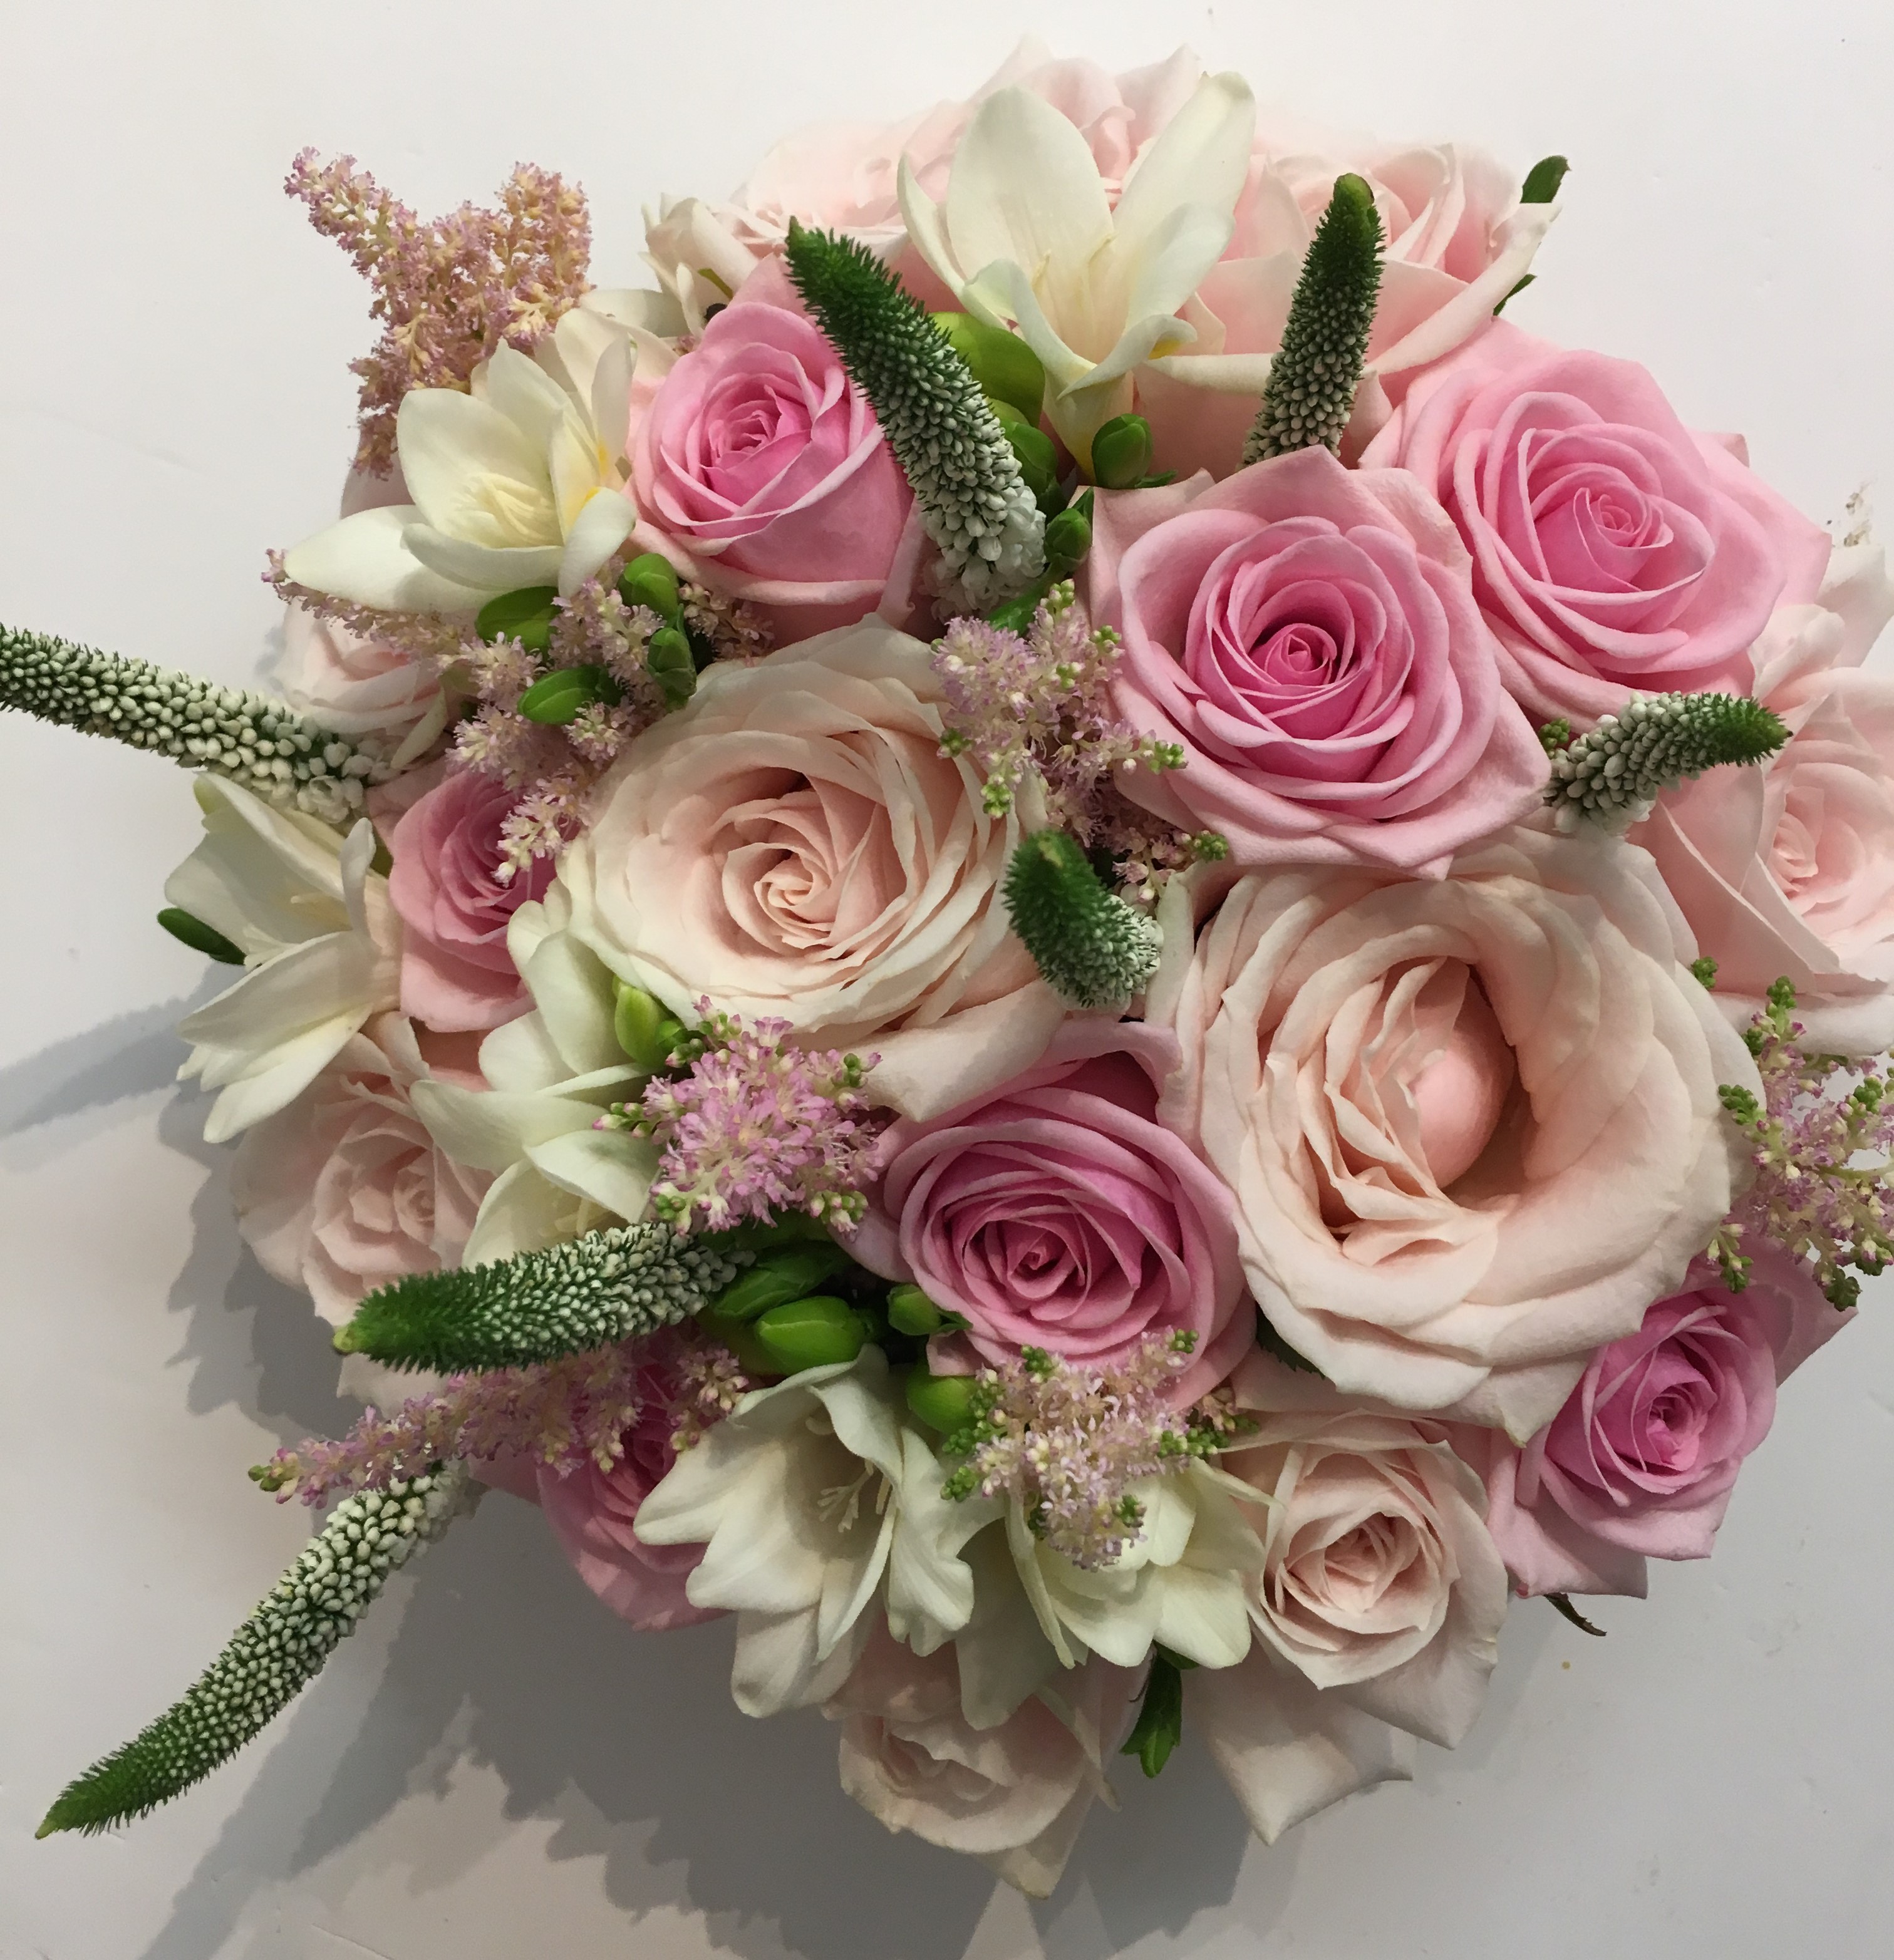 bridal bouquet of roses and ivory freesia veronica & astilbe wedding flowers in redditch